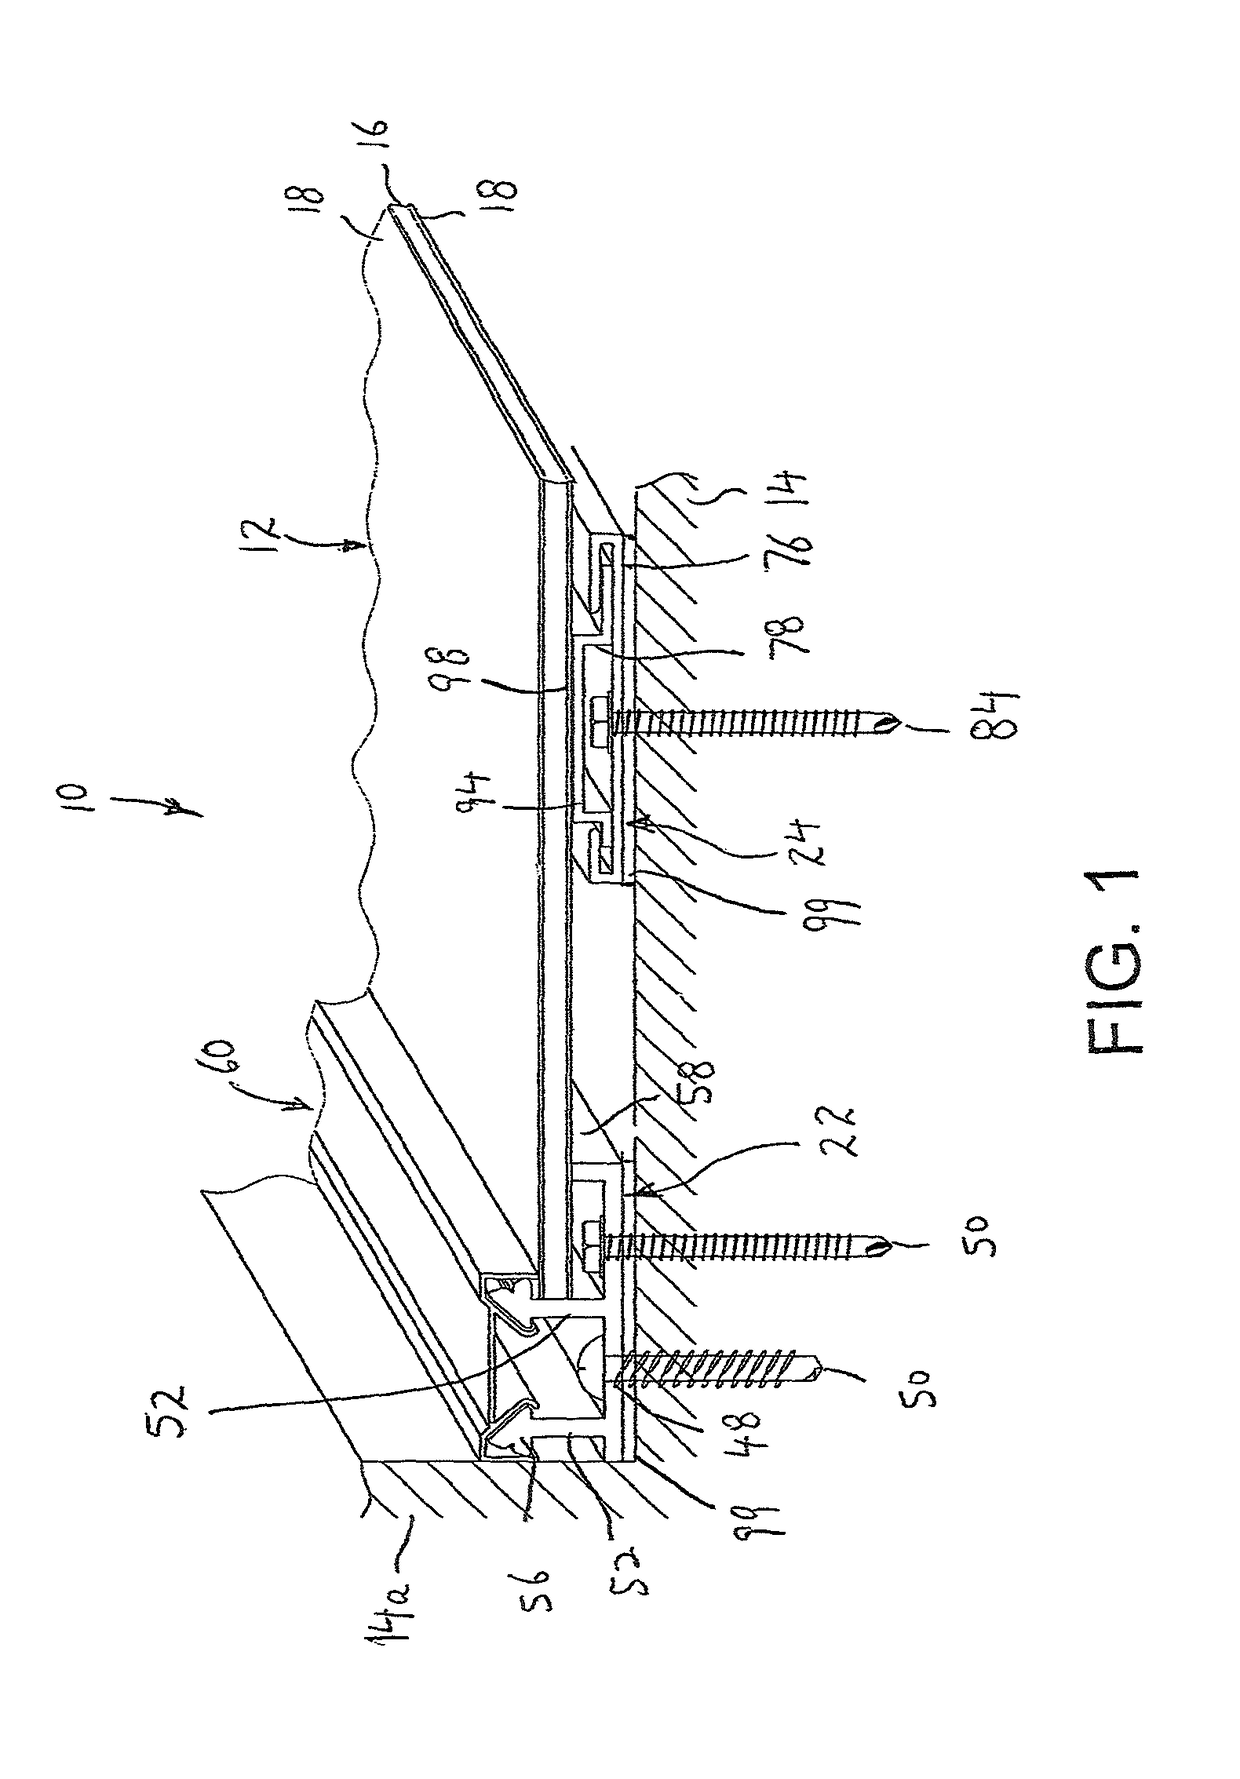 System and method for mounting wall panels to a wall